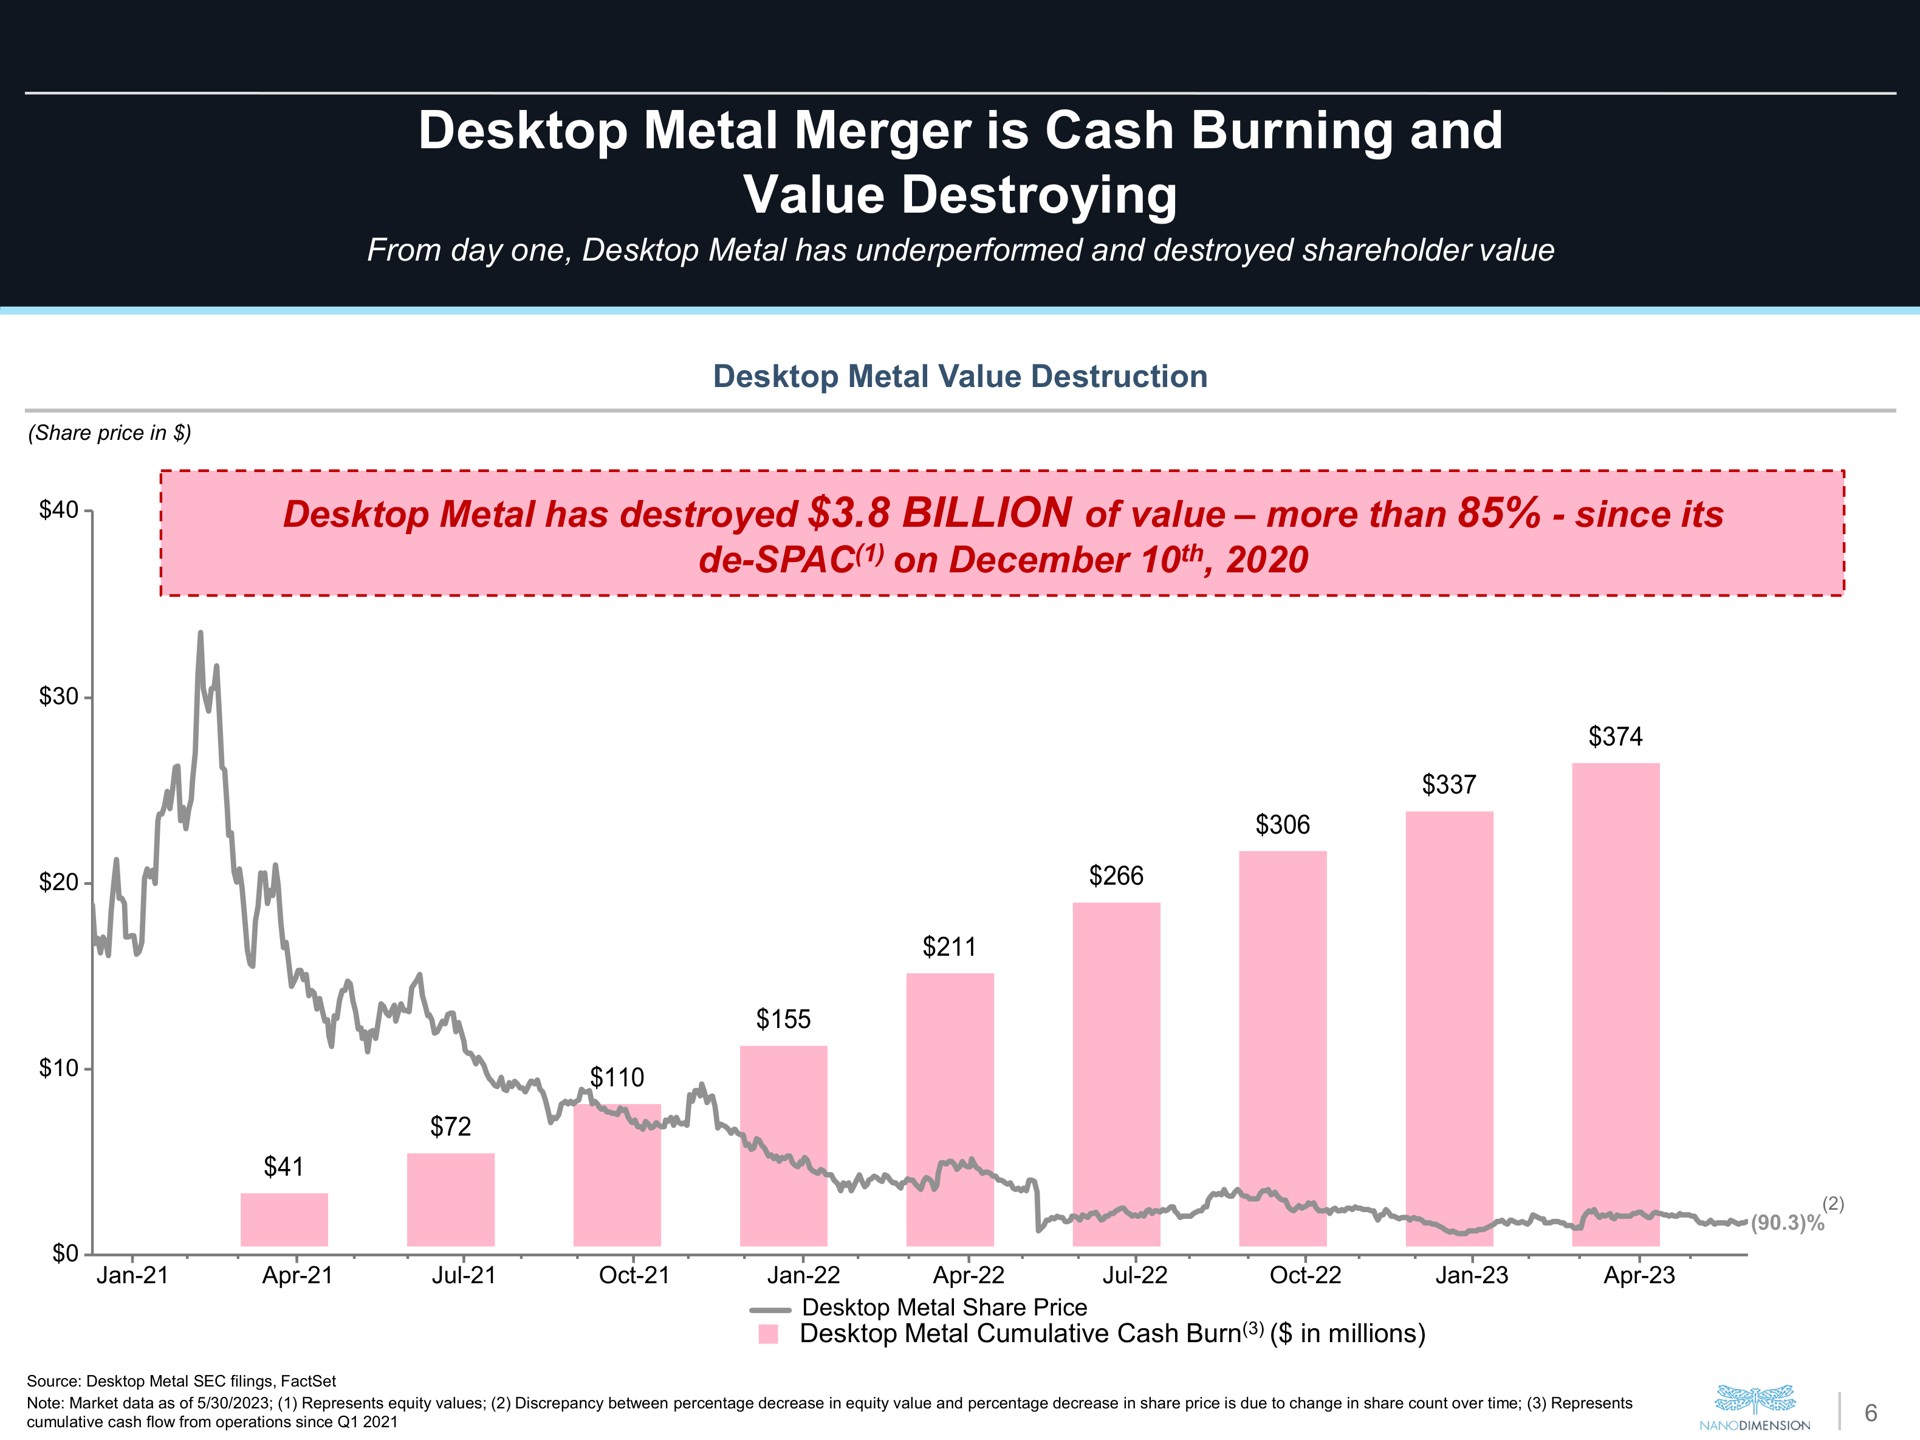 metal merger is cash burning and value destroying has destroyed billion of more than since its | Nano Dimension